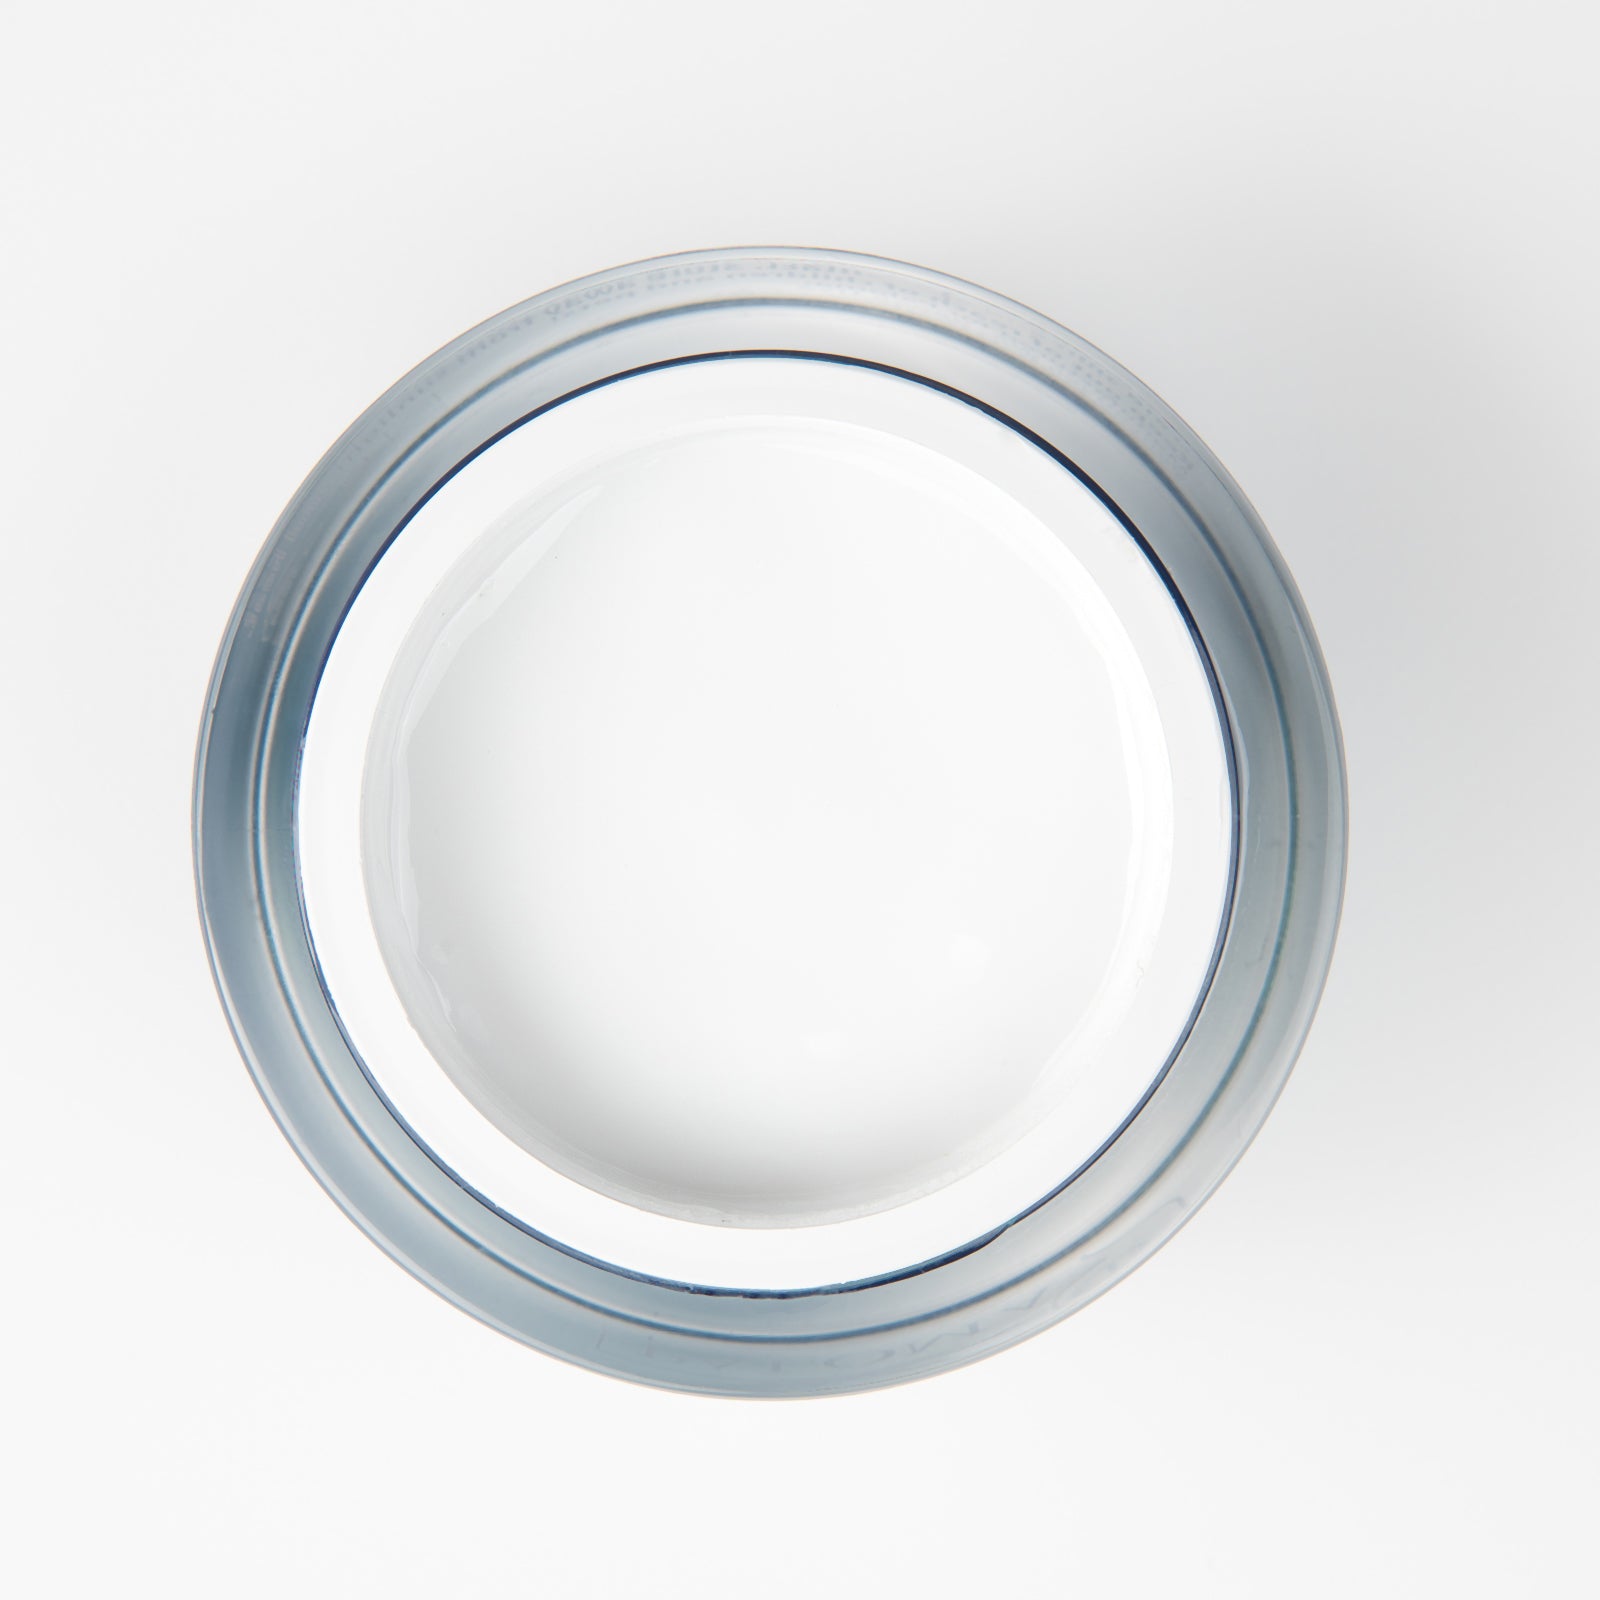 Top view of an open, transparent, circular jar filled with white builder gel, revealing a dense and creamy texture. The jar is placed against a pristine white backdrop, suggestive of a professional studio setting.